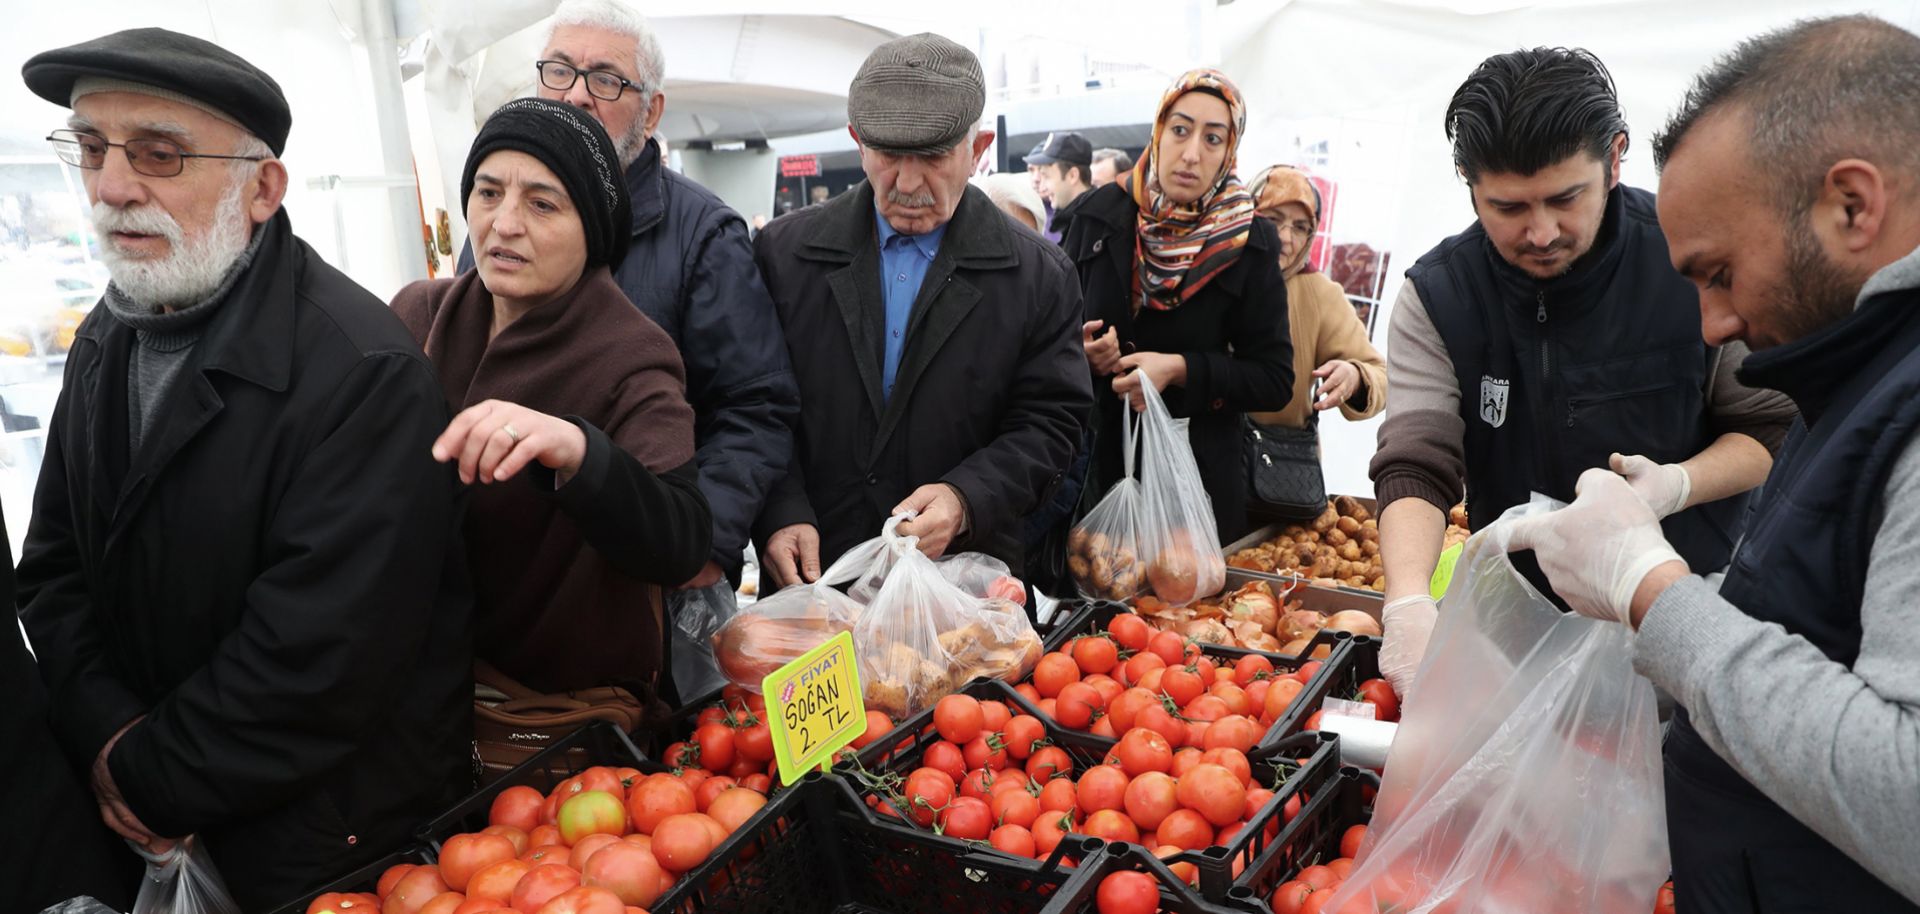 People line up to buy subsidized vegetables at a tent set up by the Ankara Metropolitan Municipality in the Cankaya district of the Turkish capital on Feb. 13, 2019.